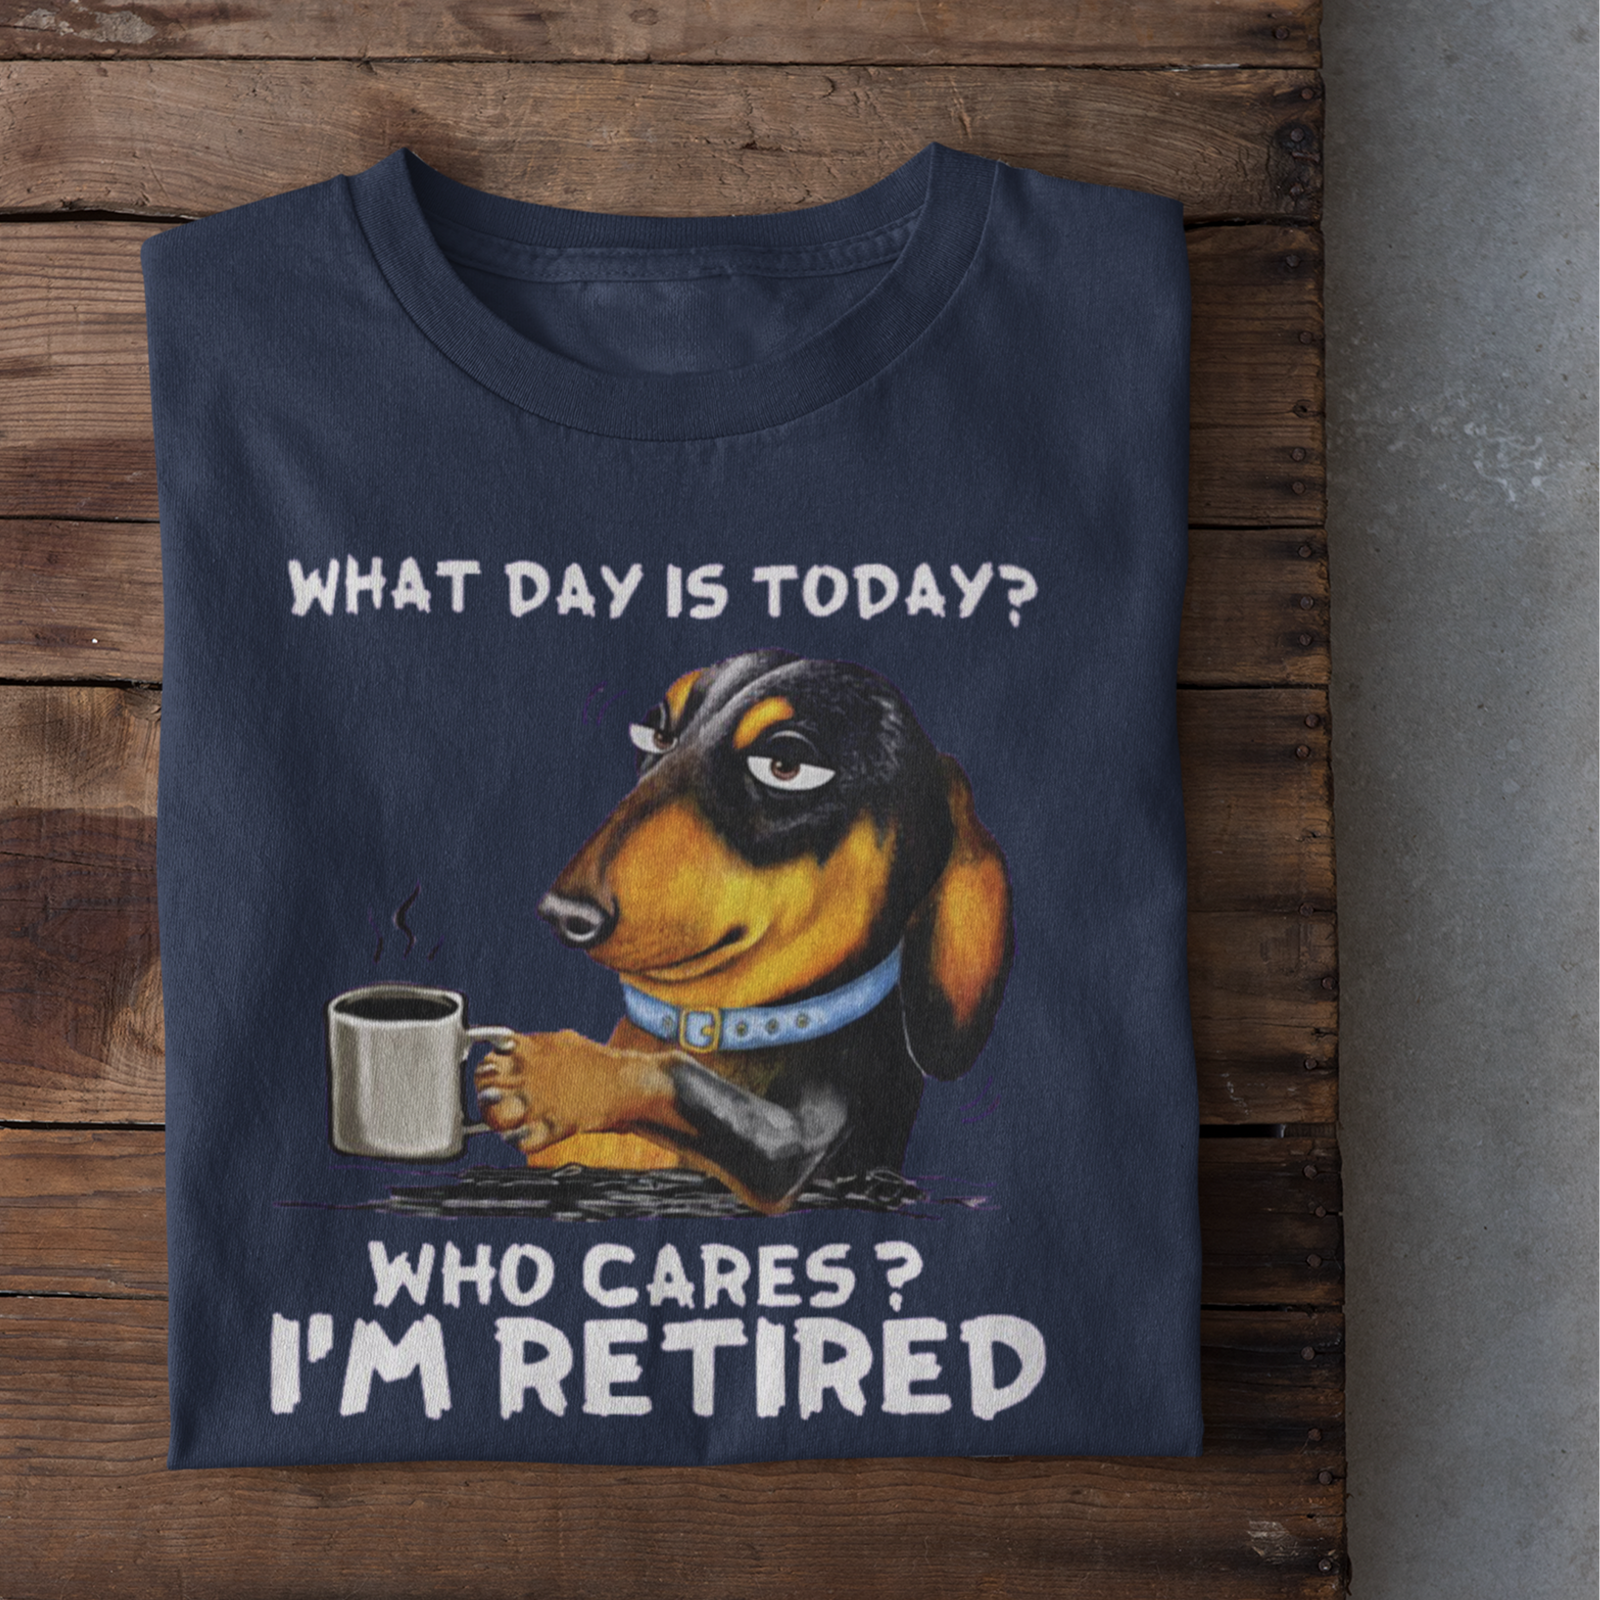 What Day Is Today, Who Cares I'm Retired Shirt, Funny Shirt